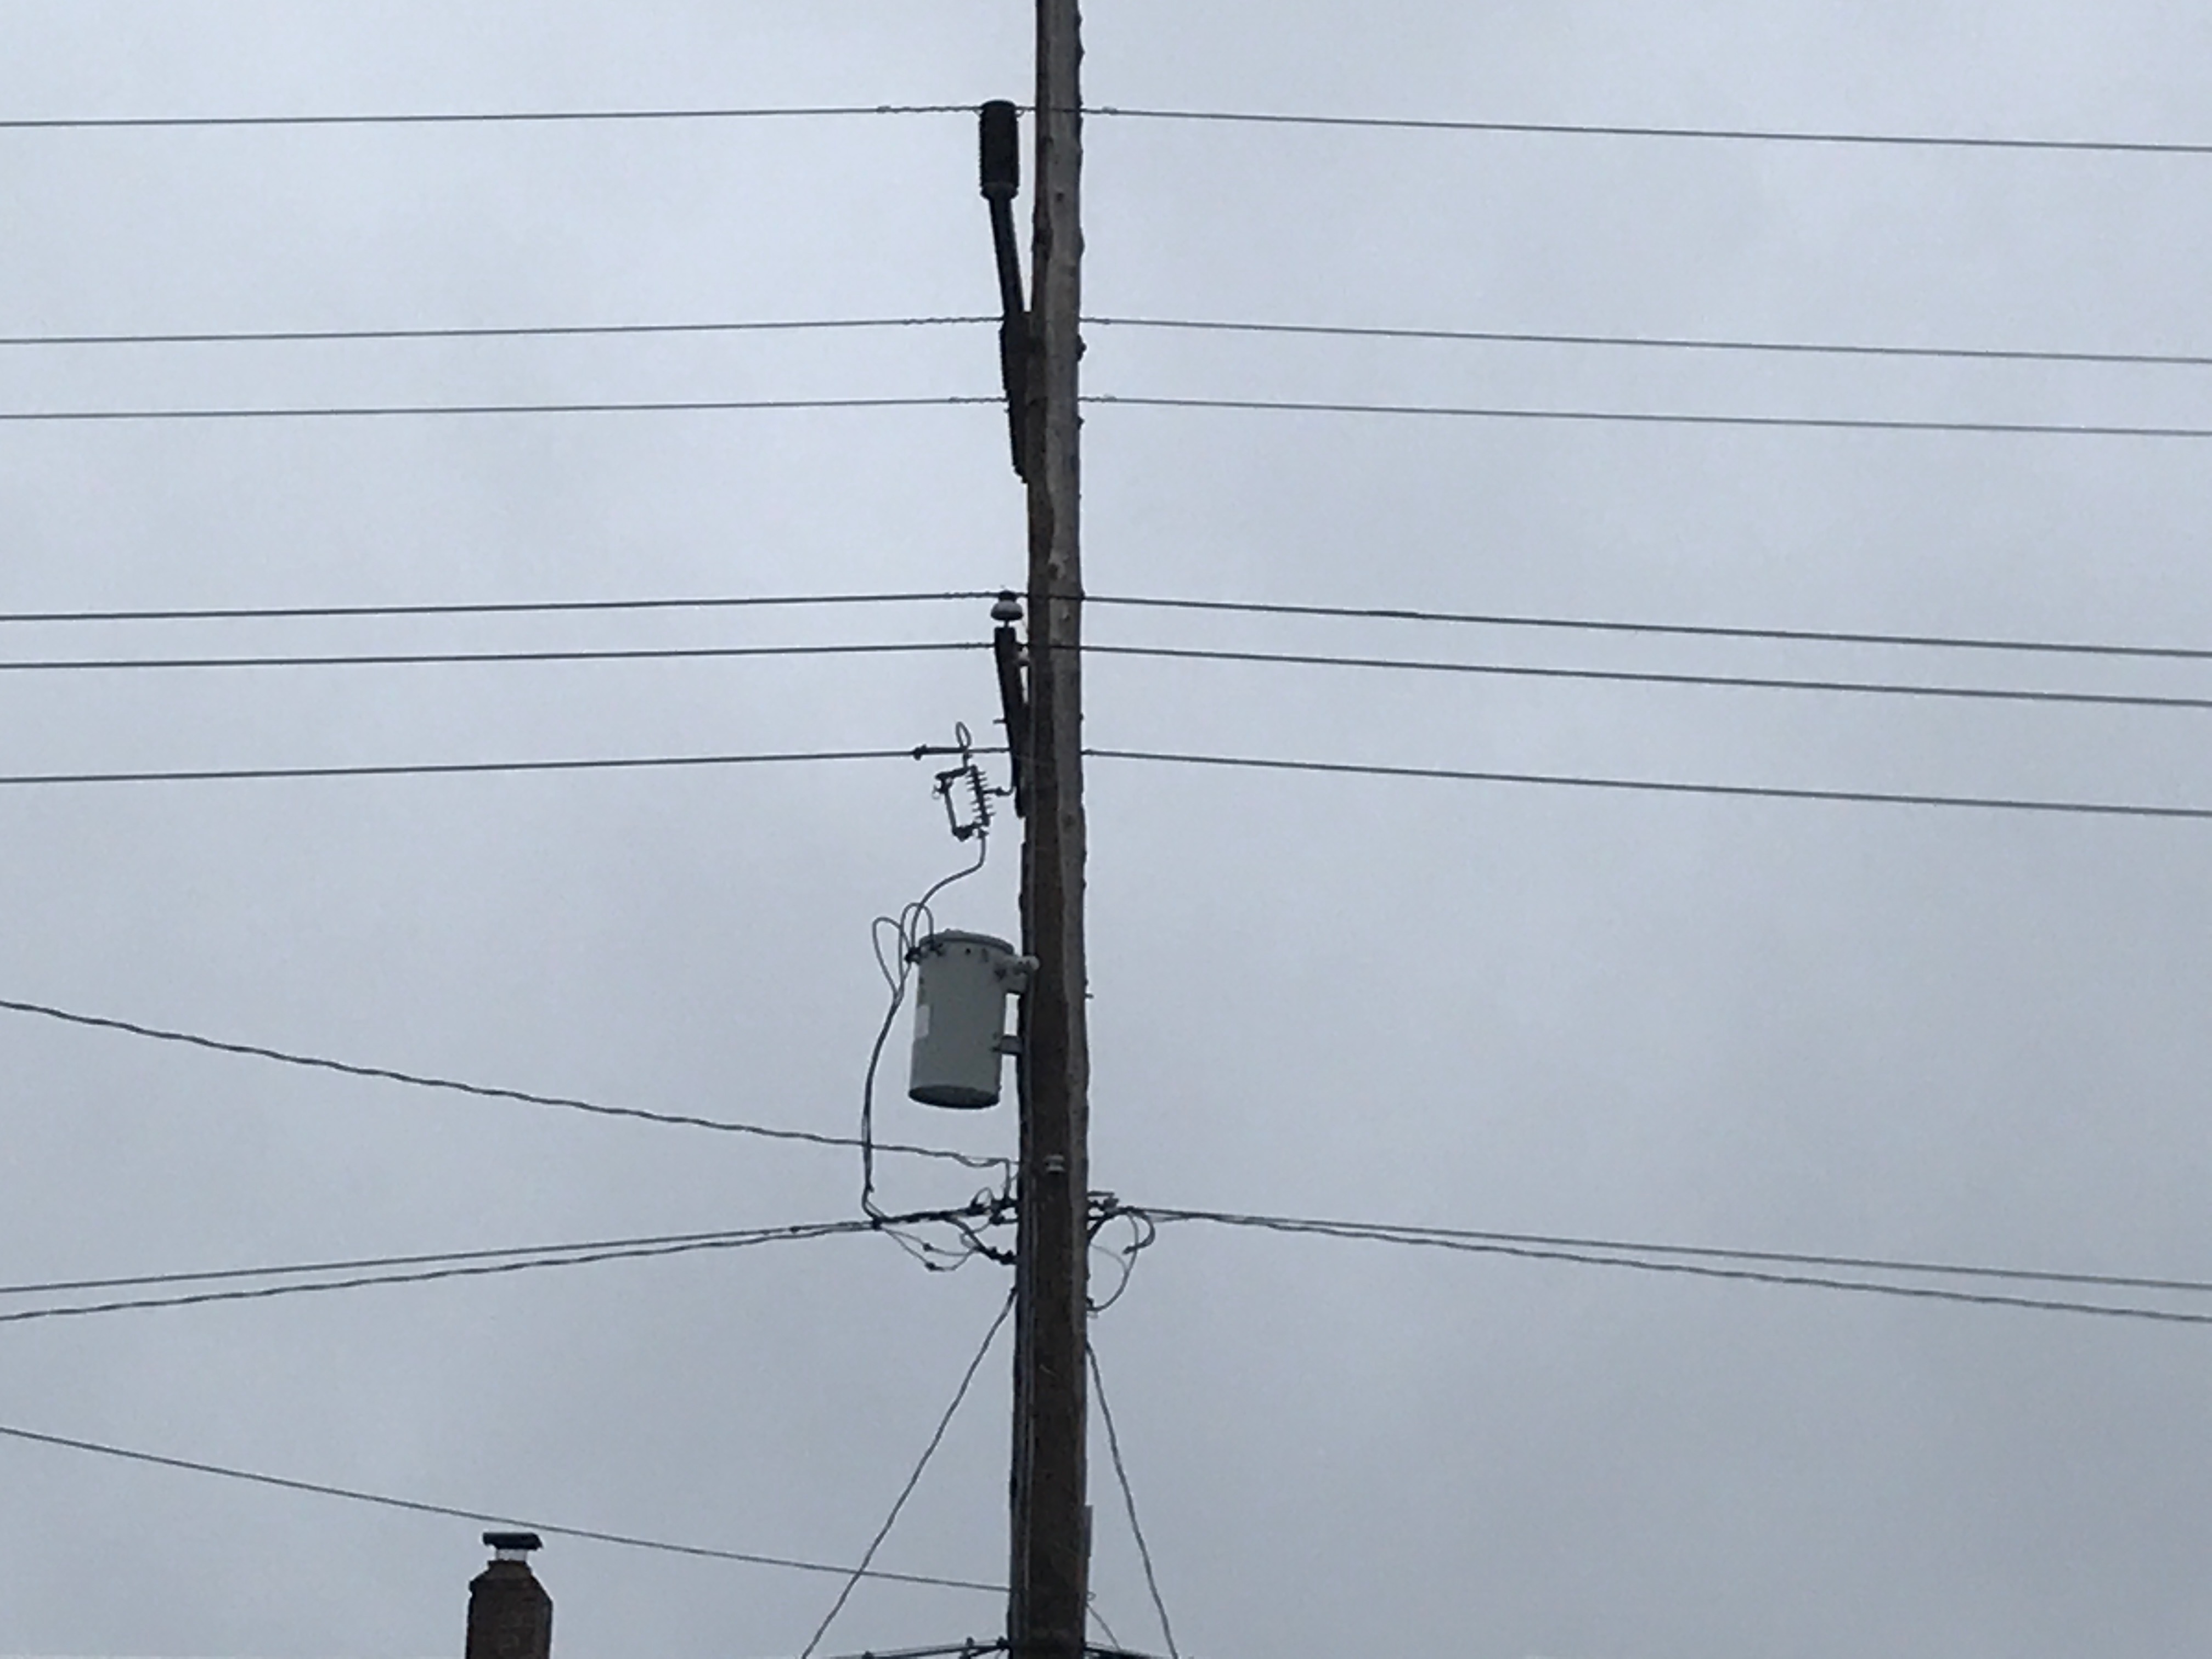 An utility pole with electrical equipment. (Photo: Daniel Nee)